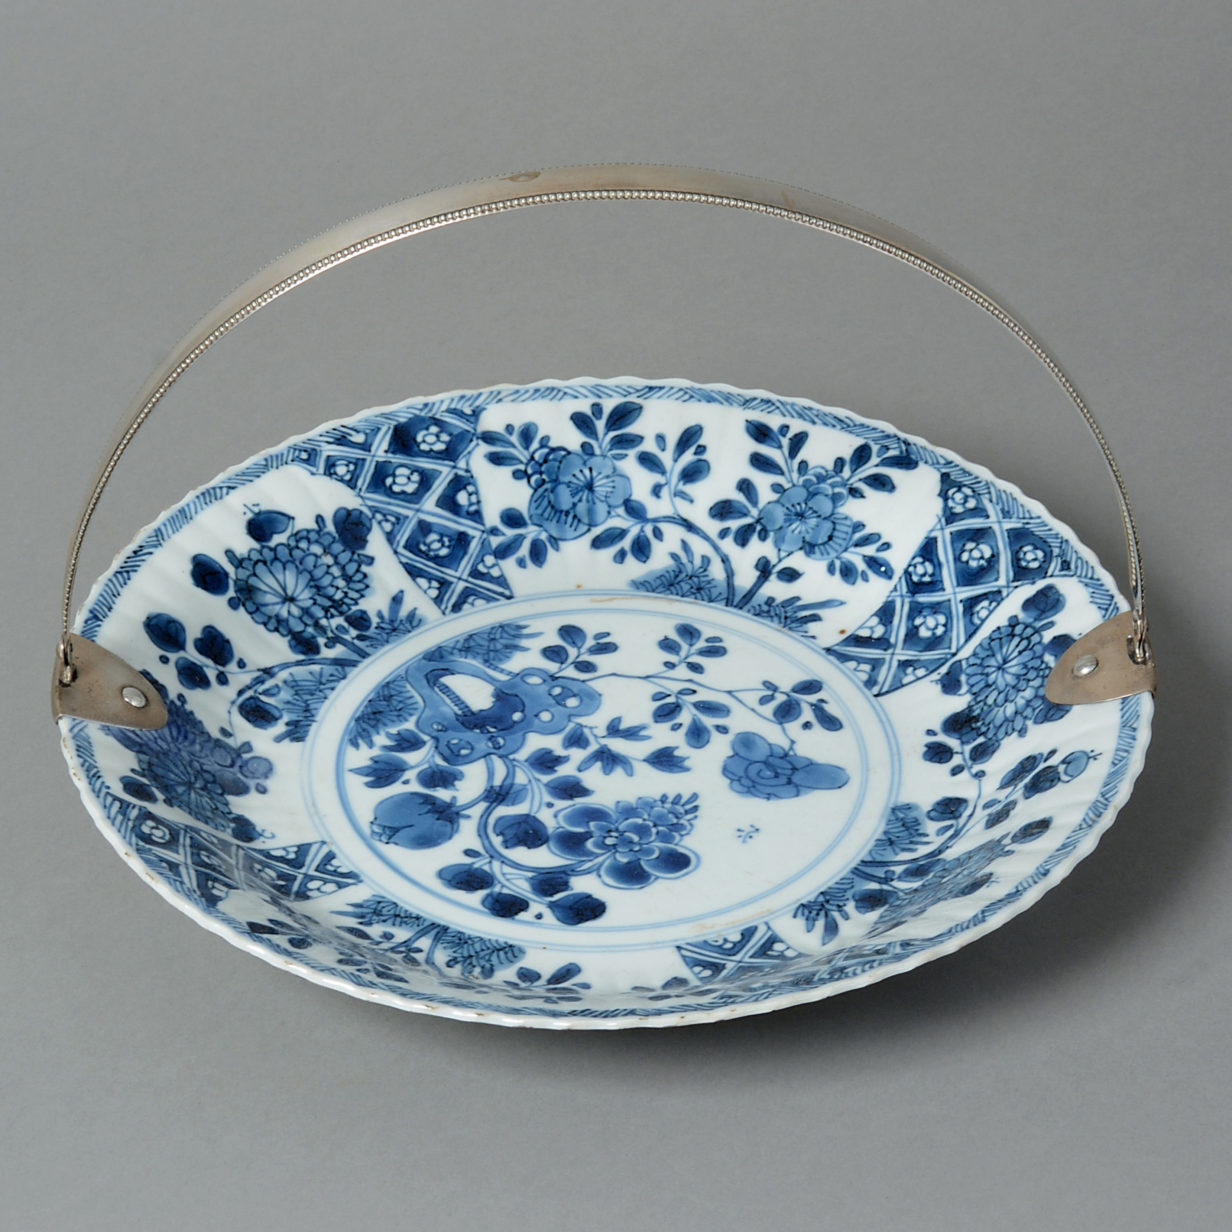 An early 18th century kangxi plate with european silver handle